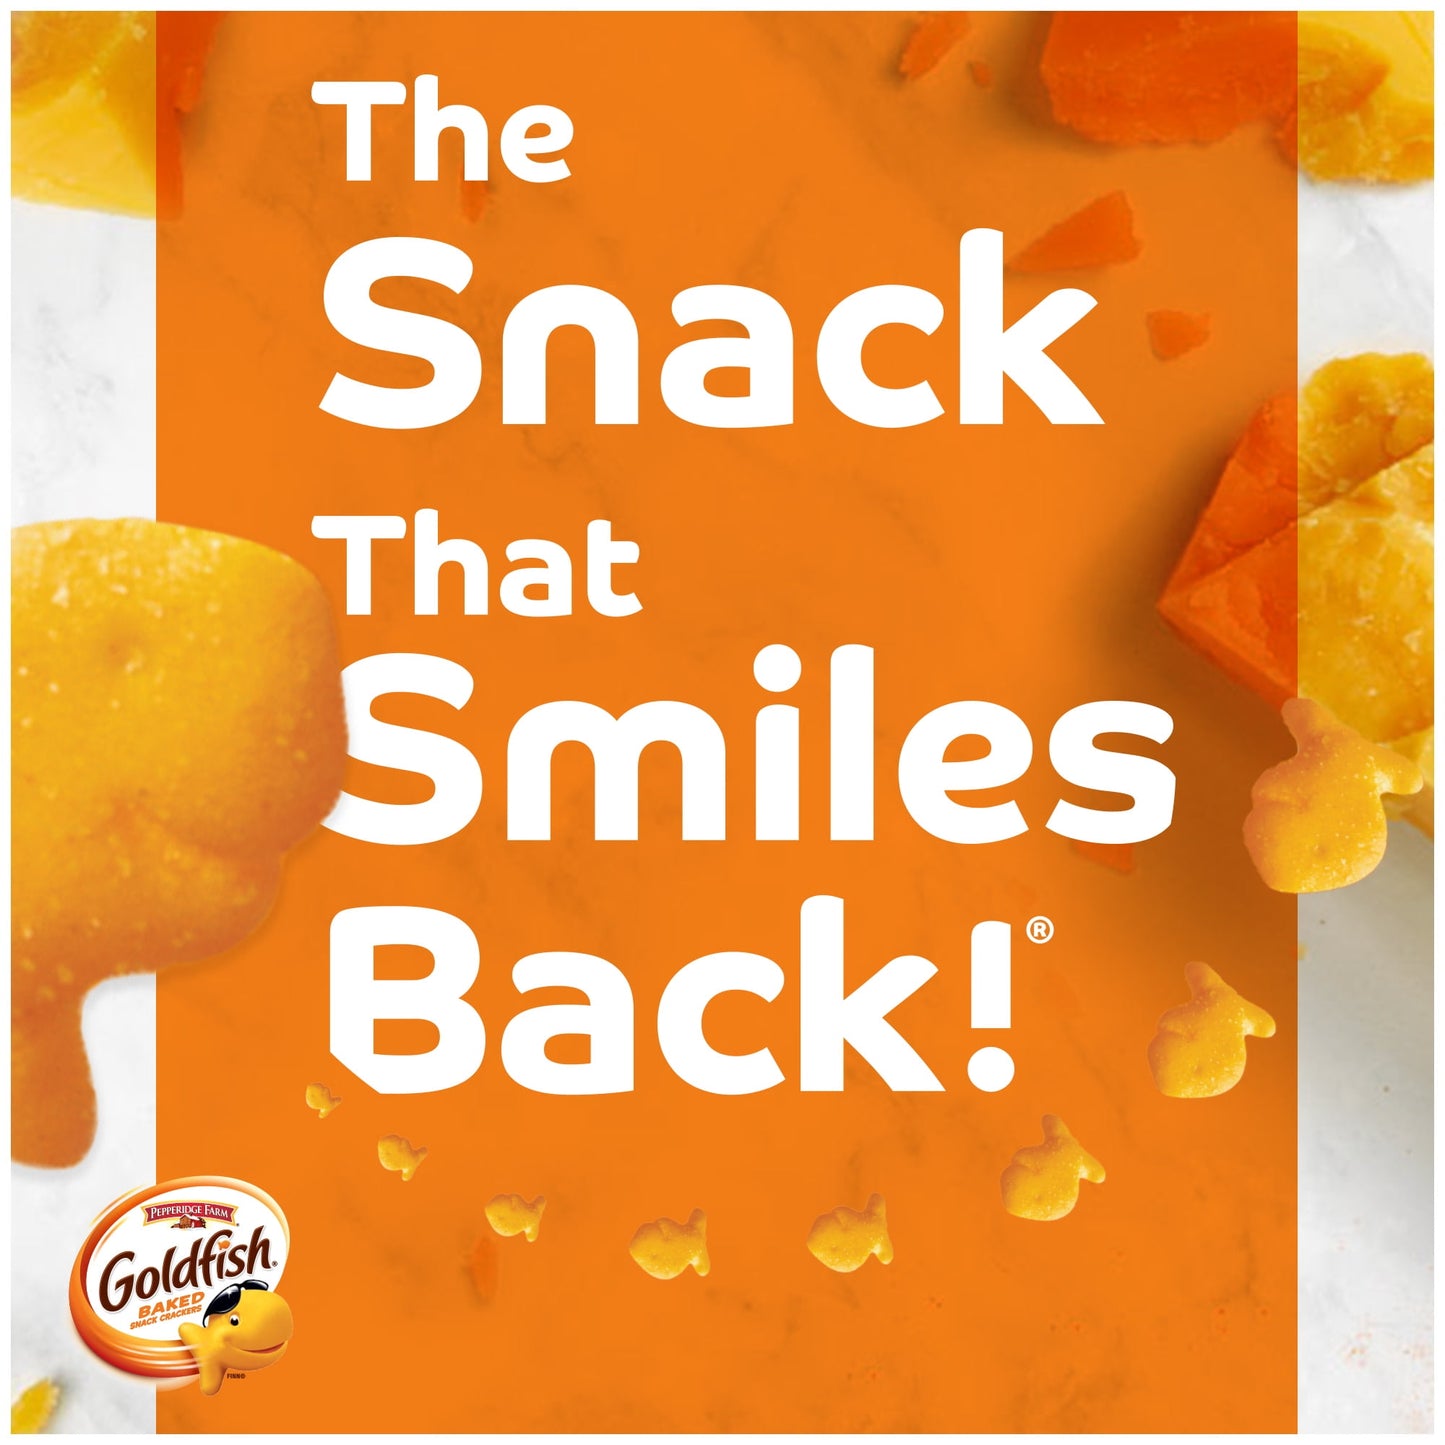 Goldfish Cheddar Cheese Crackers, Baked Snack Crackers, 6.6 oz Bag